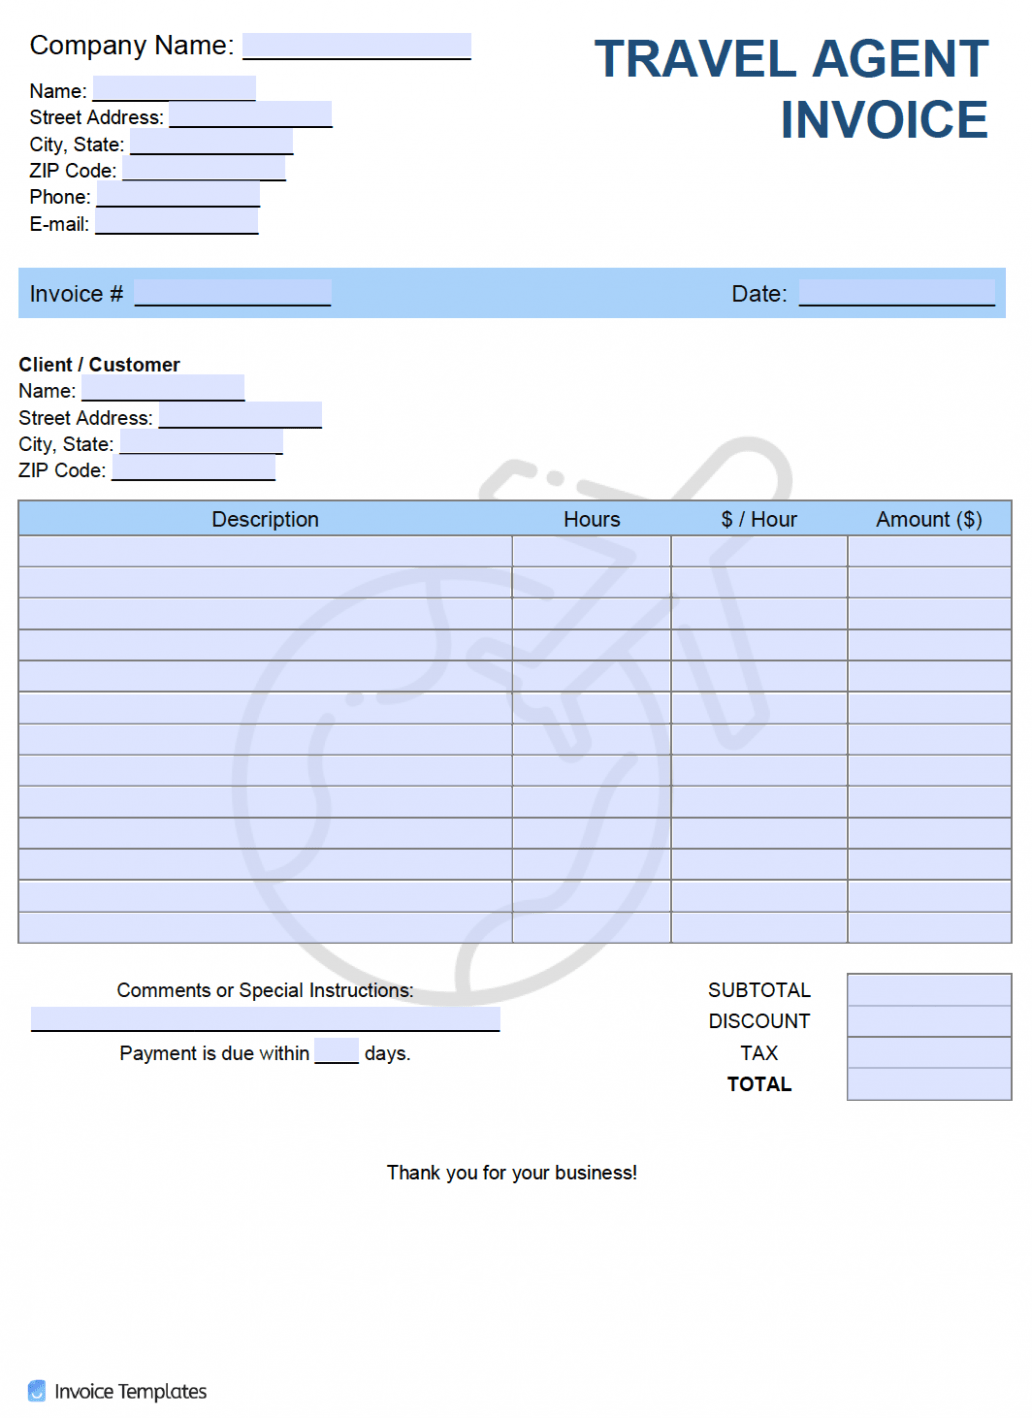 Printable Airline Ticket Invoice Template PDF